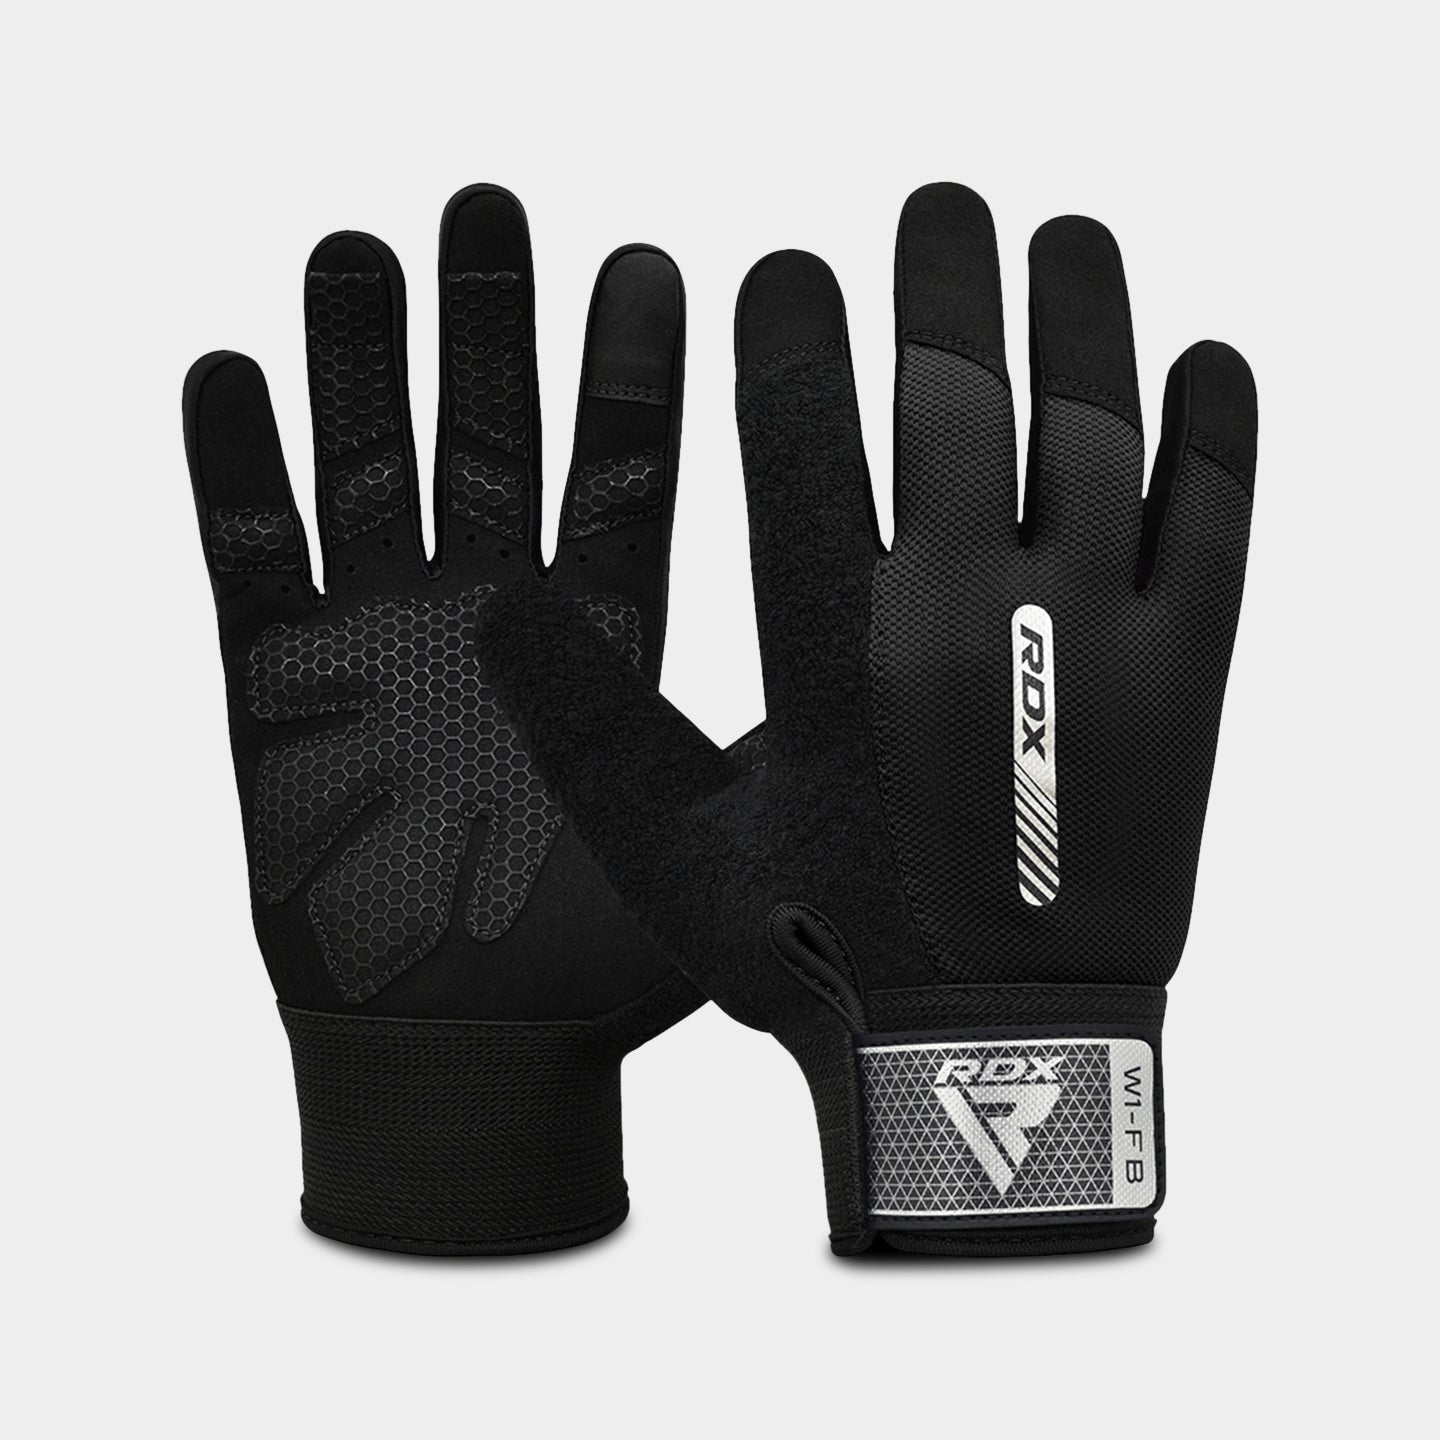 RDX Sports W1 Full Finger Gym Workout Gloves A1